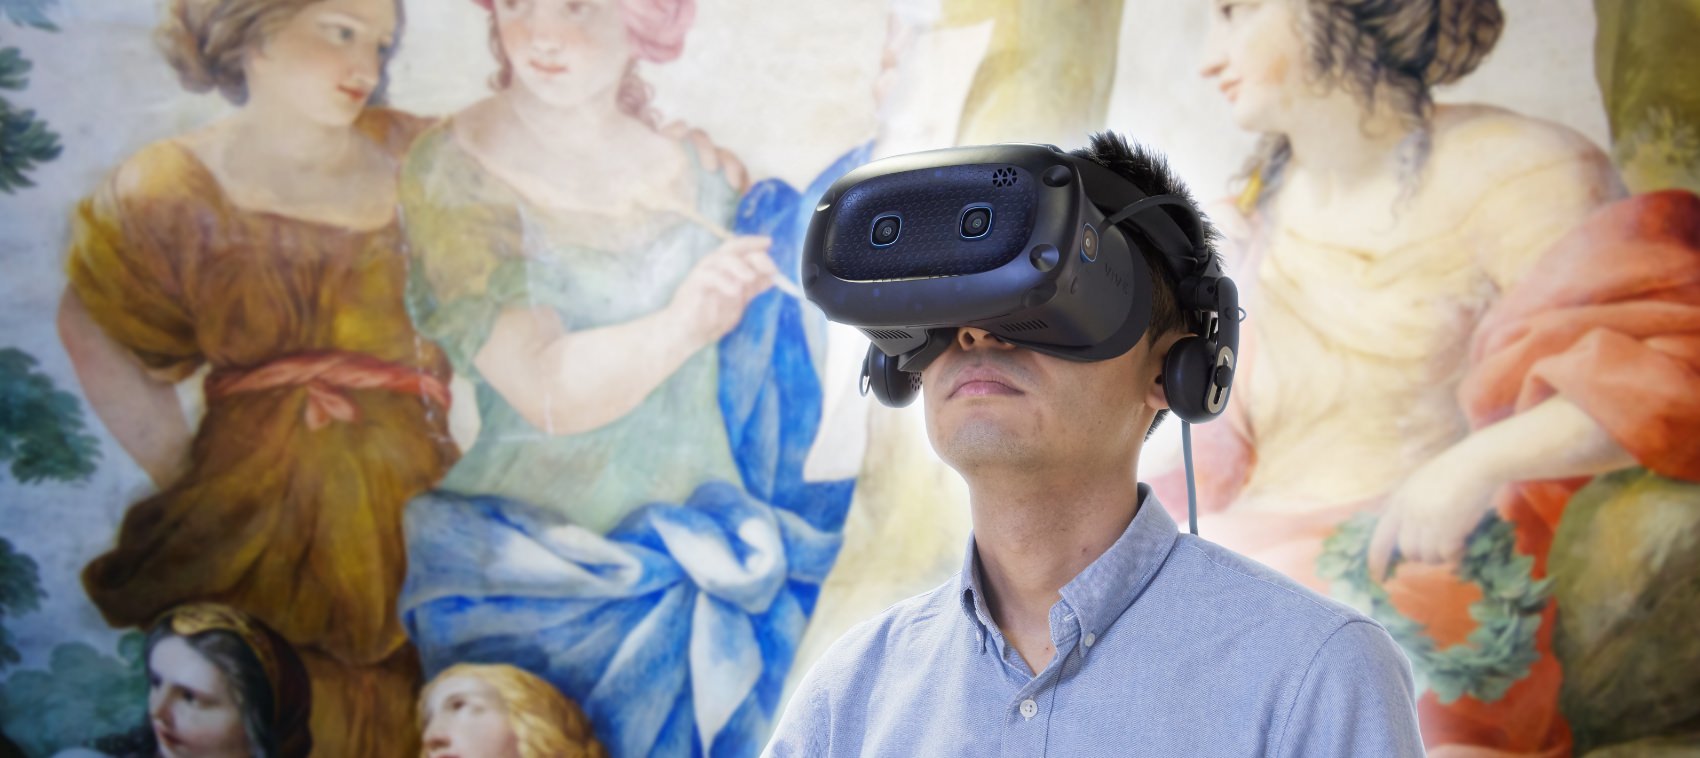 Image of using a head-mounted display for art appreciation